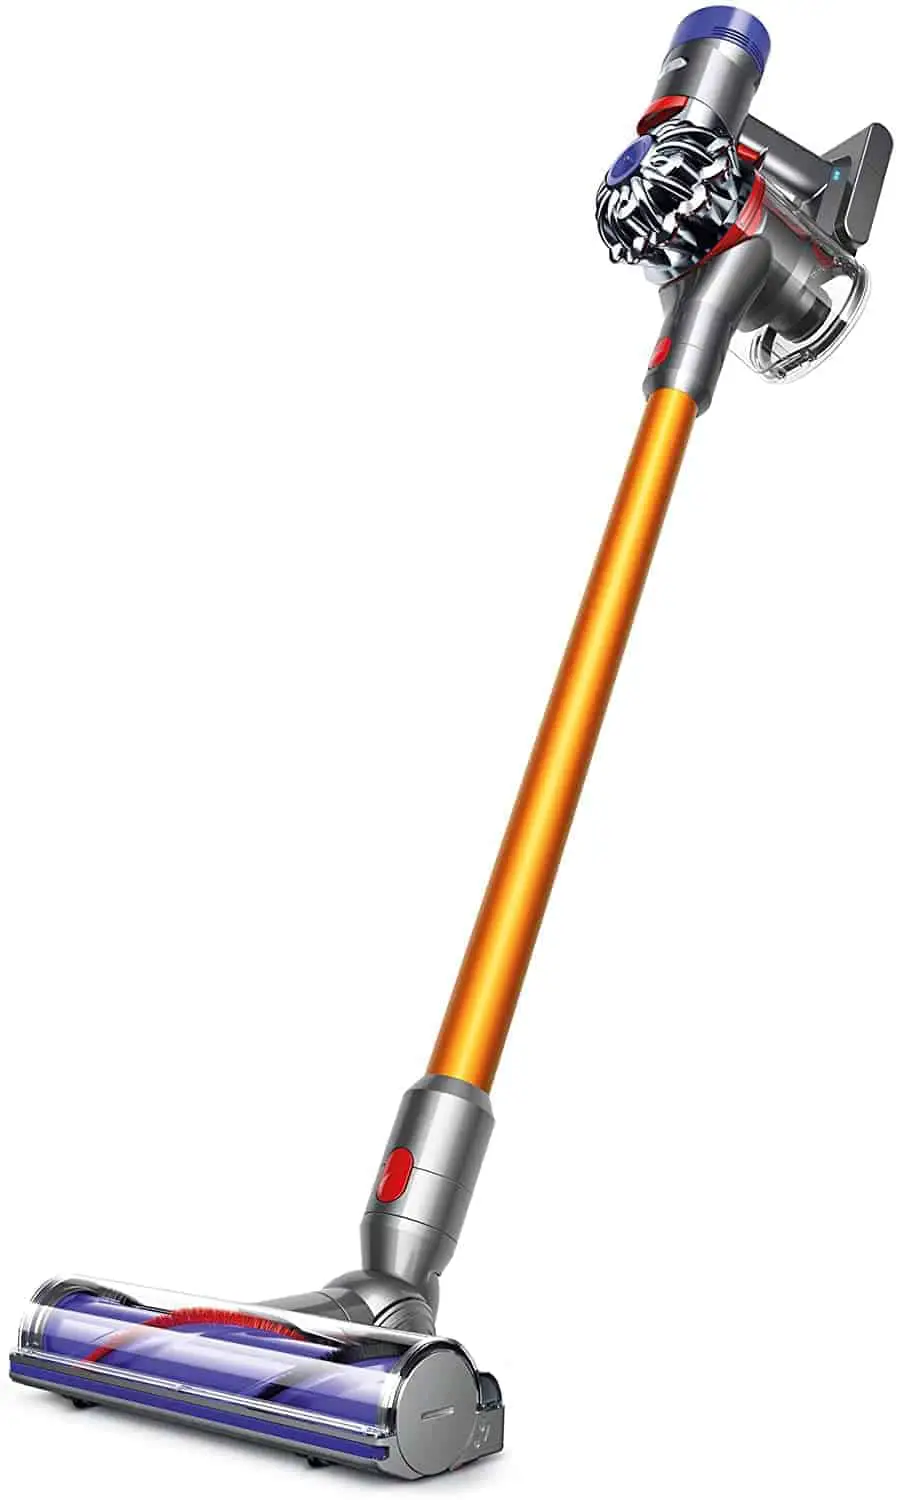 Absolute best cordless stick and handheld vacuum: Dyson V8